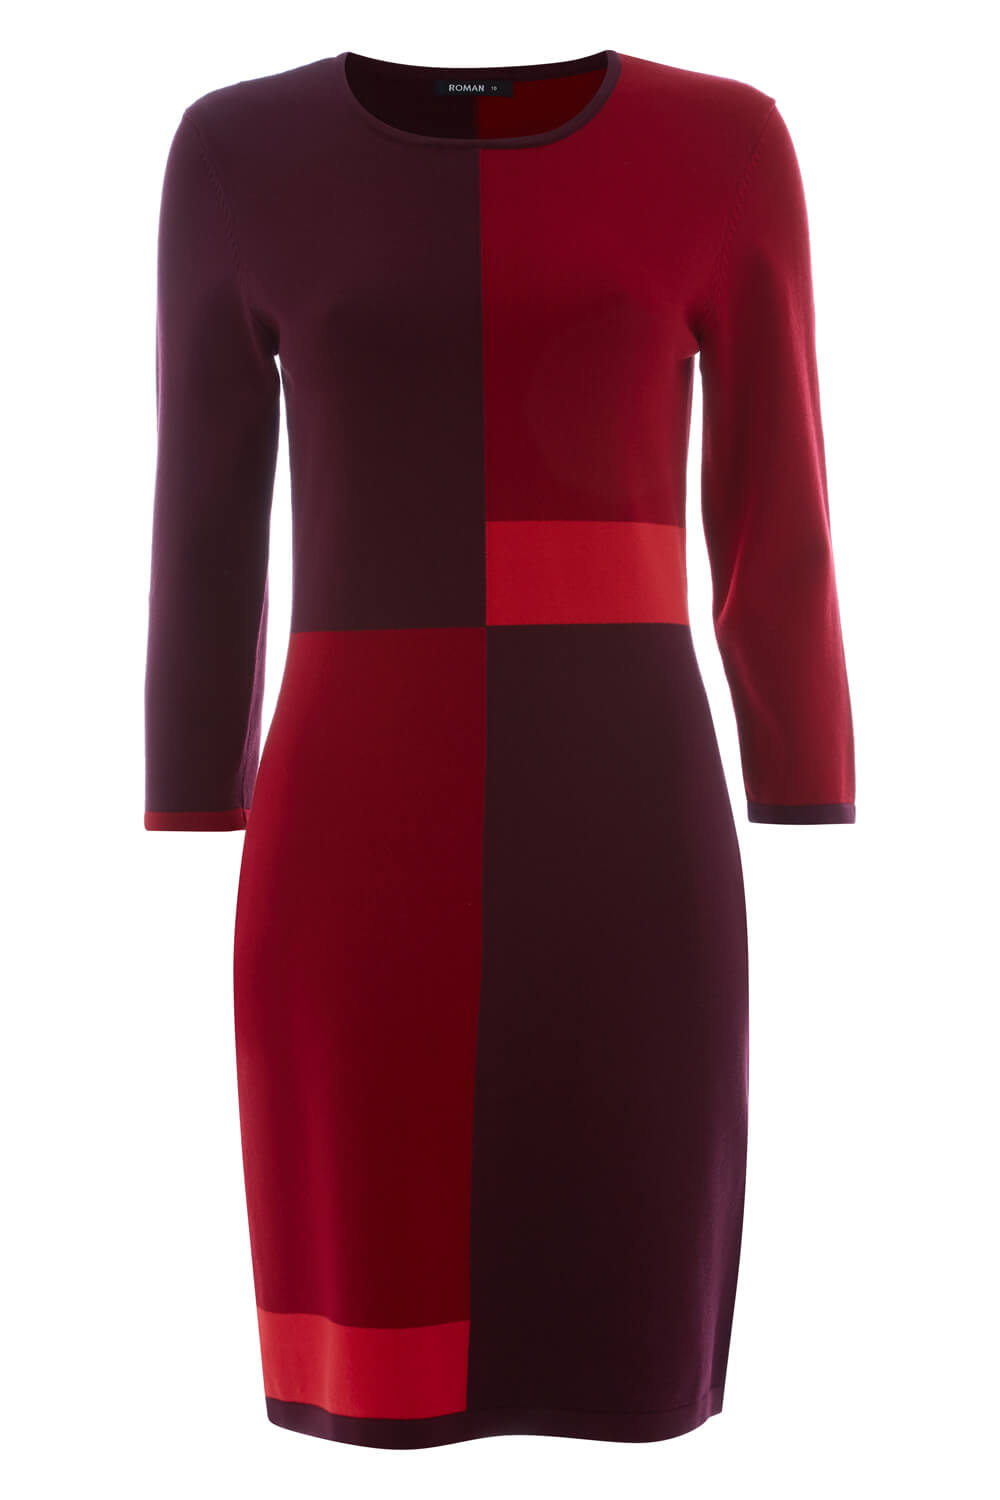 Red Colour Block Knitted Dress, Image 4 of 4